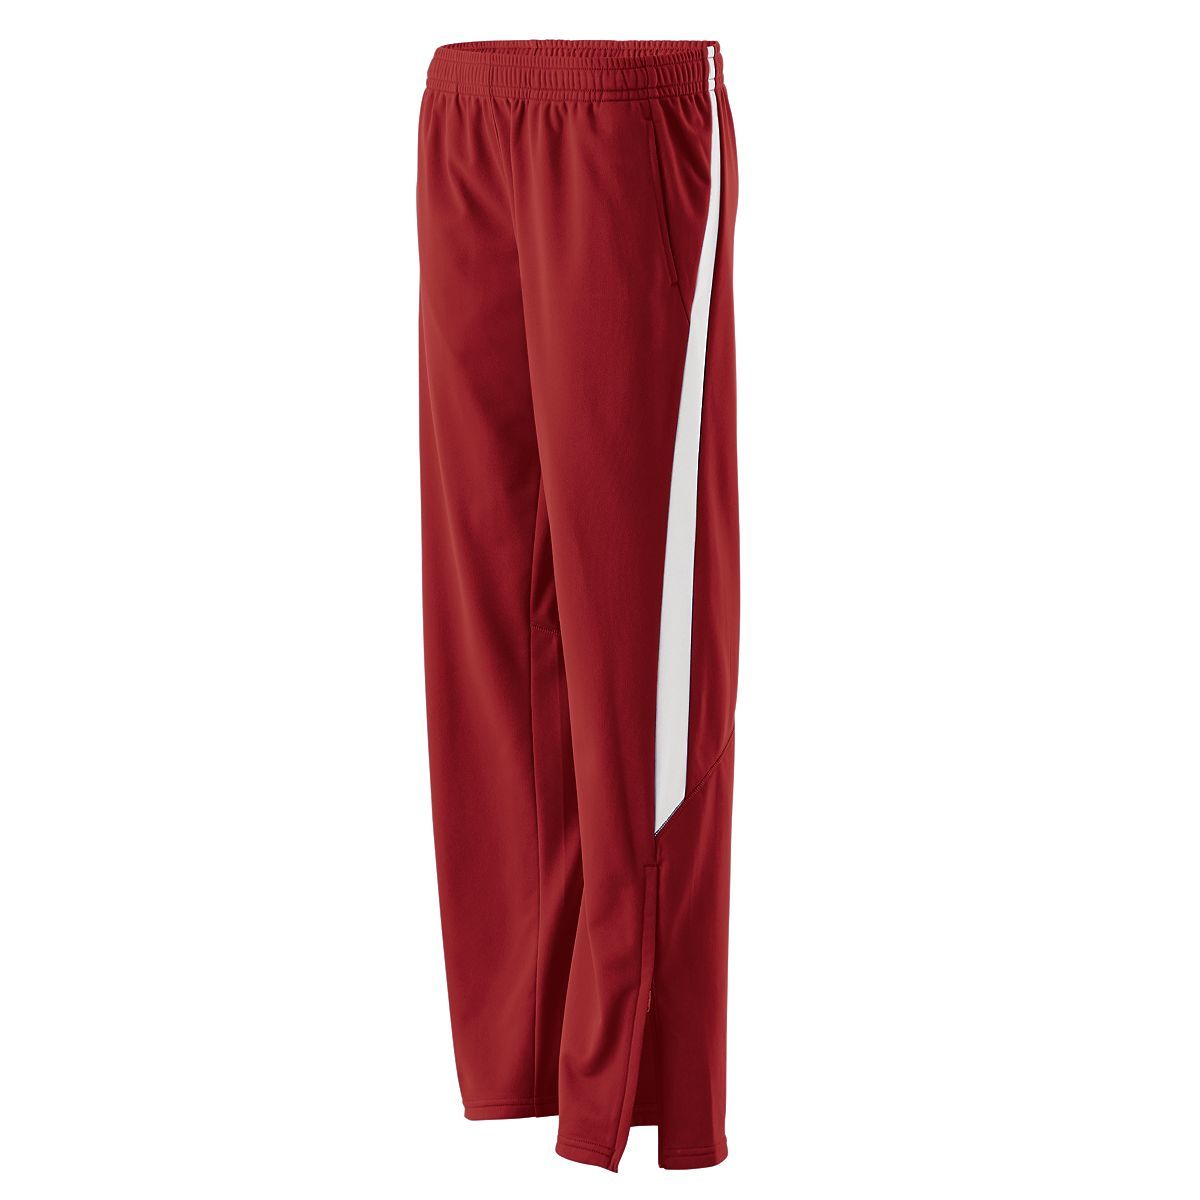 Holloway Ladies Determination Pant in Scarlet/White  -Part of the Ladies, Ladies-Pants, Pants, Holloway product lines at KanaleyCreations.com